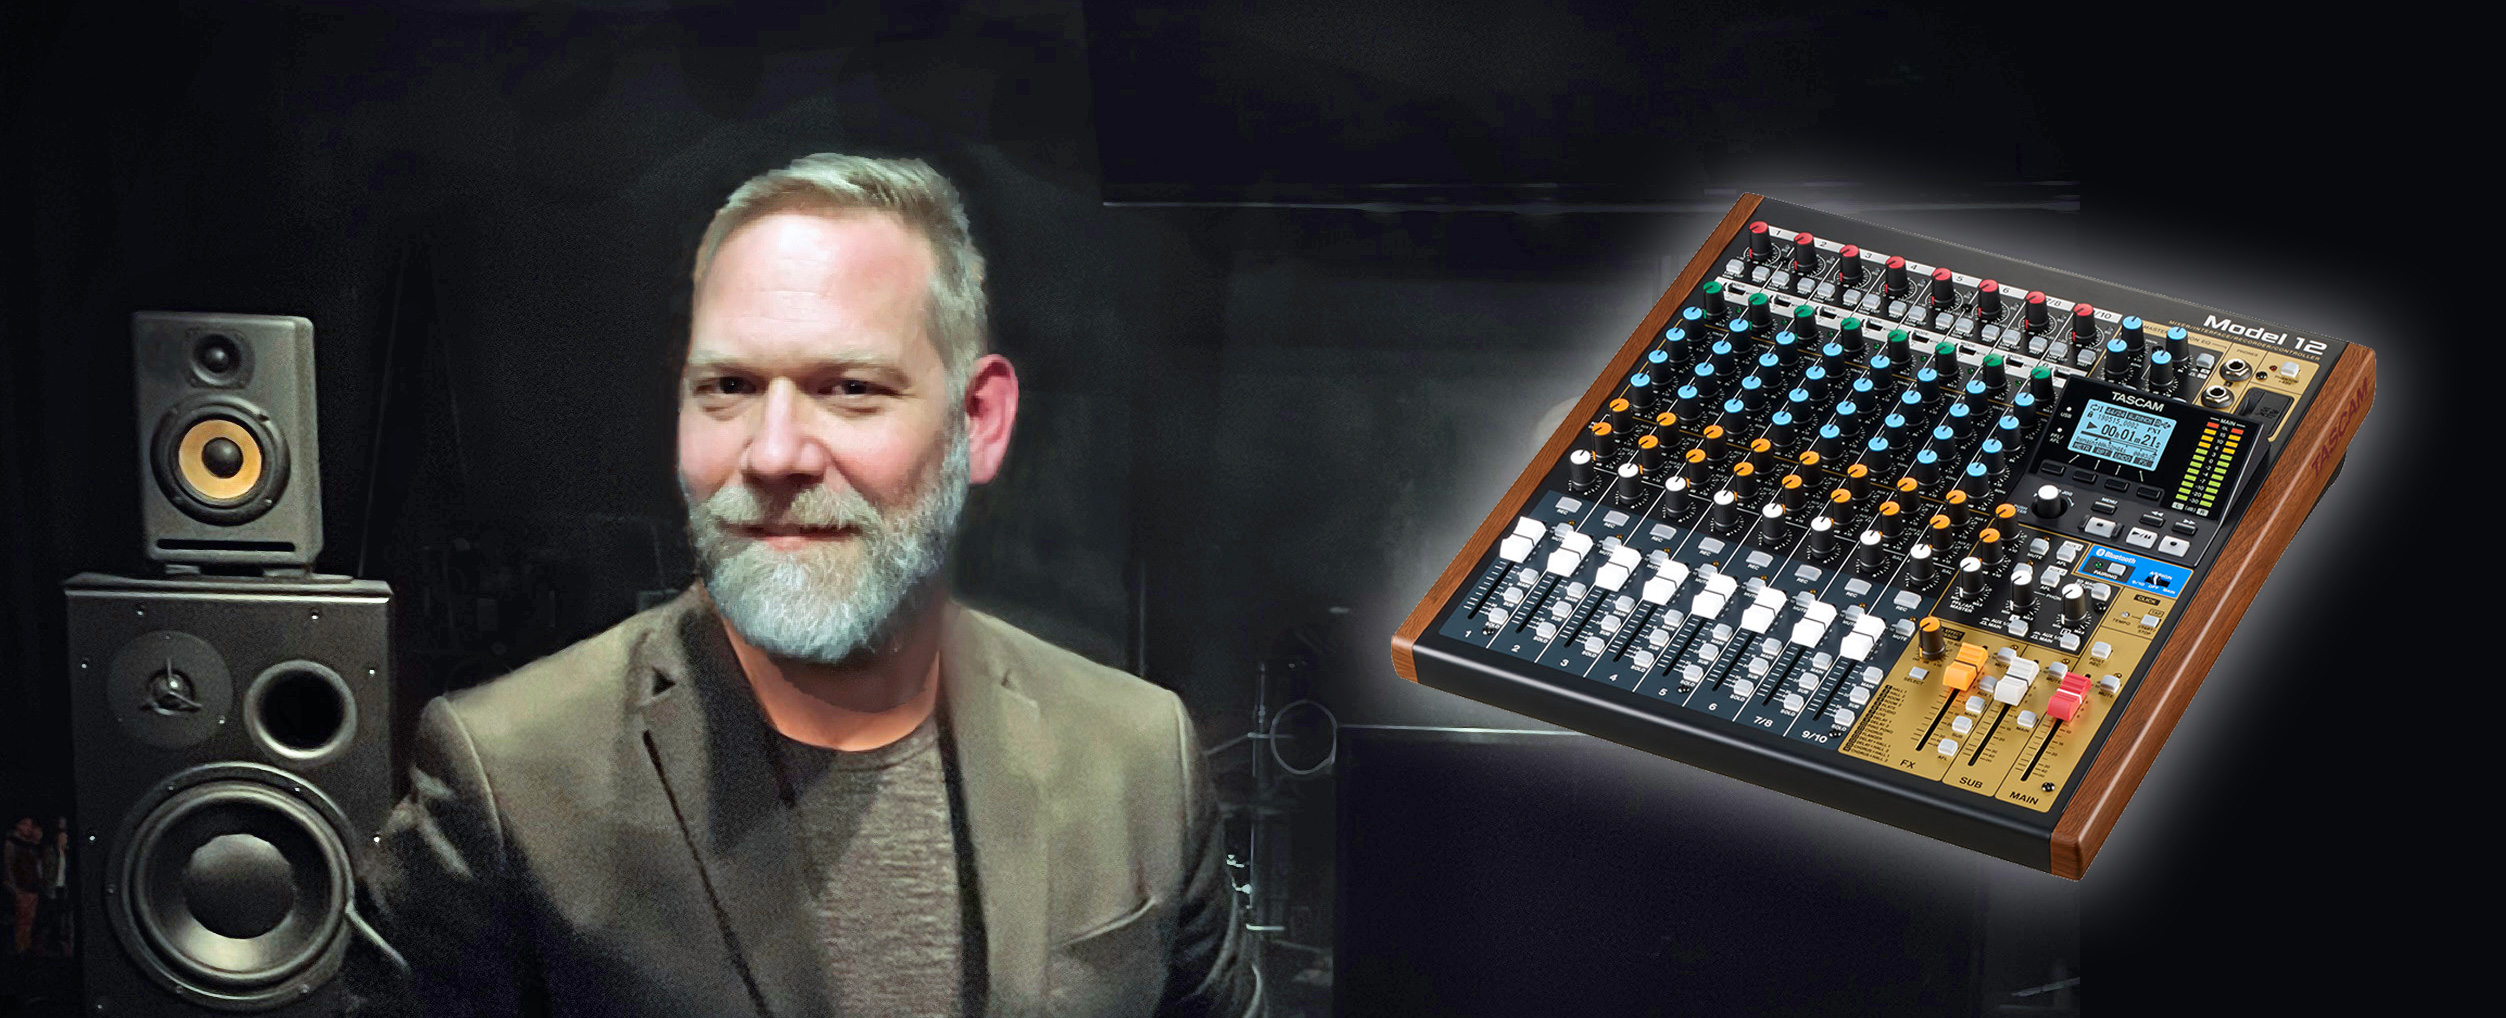 The TASCAM Model 12 Keeps the Creativity Flowing for Colton Weatherston